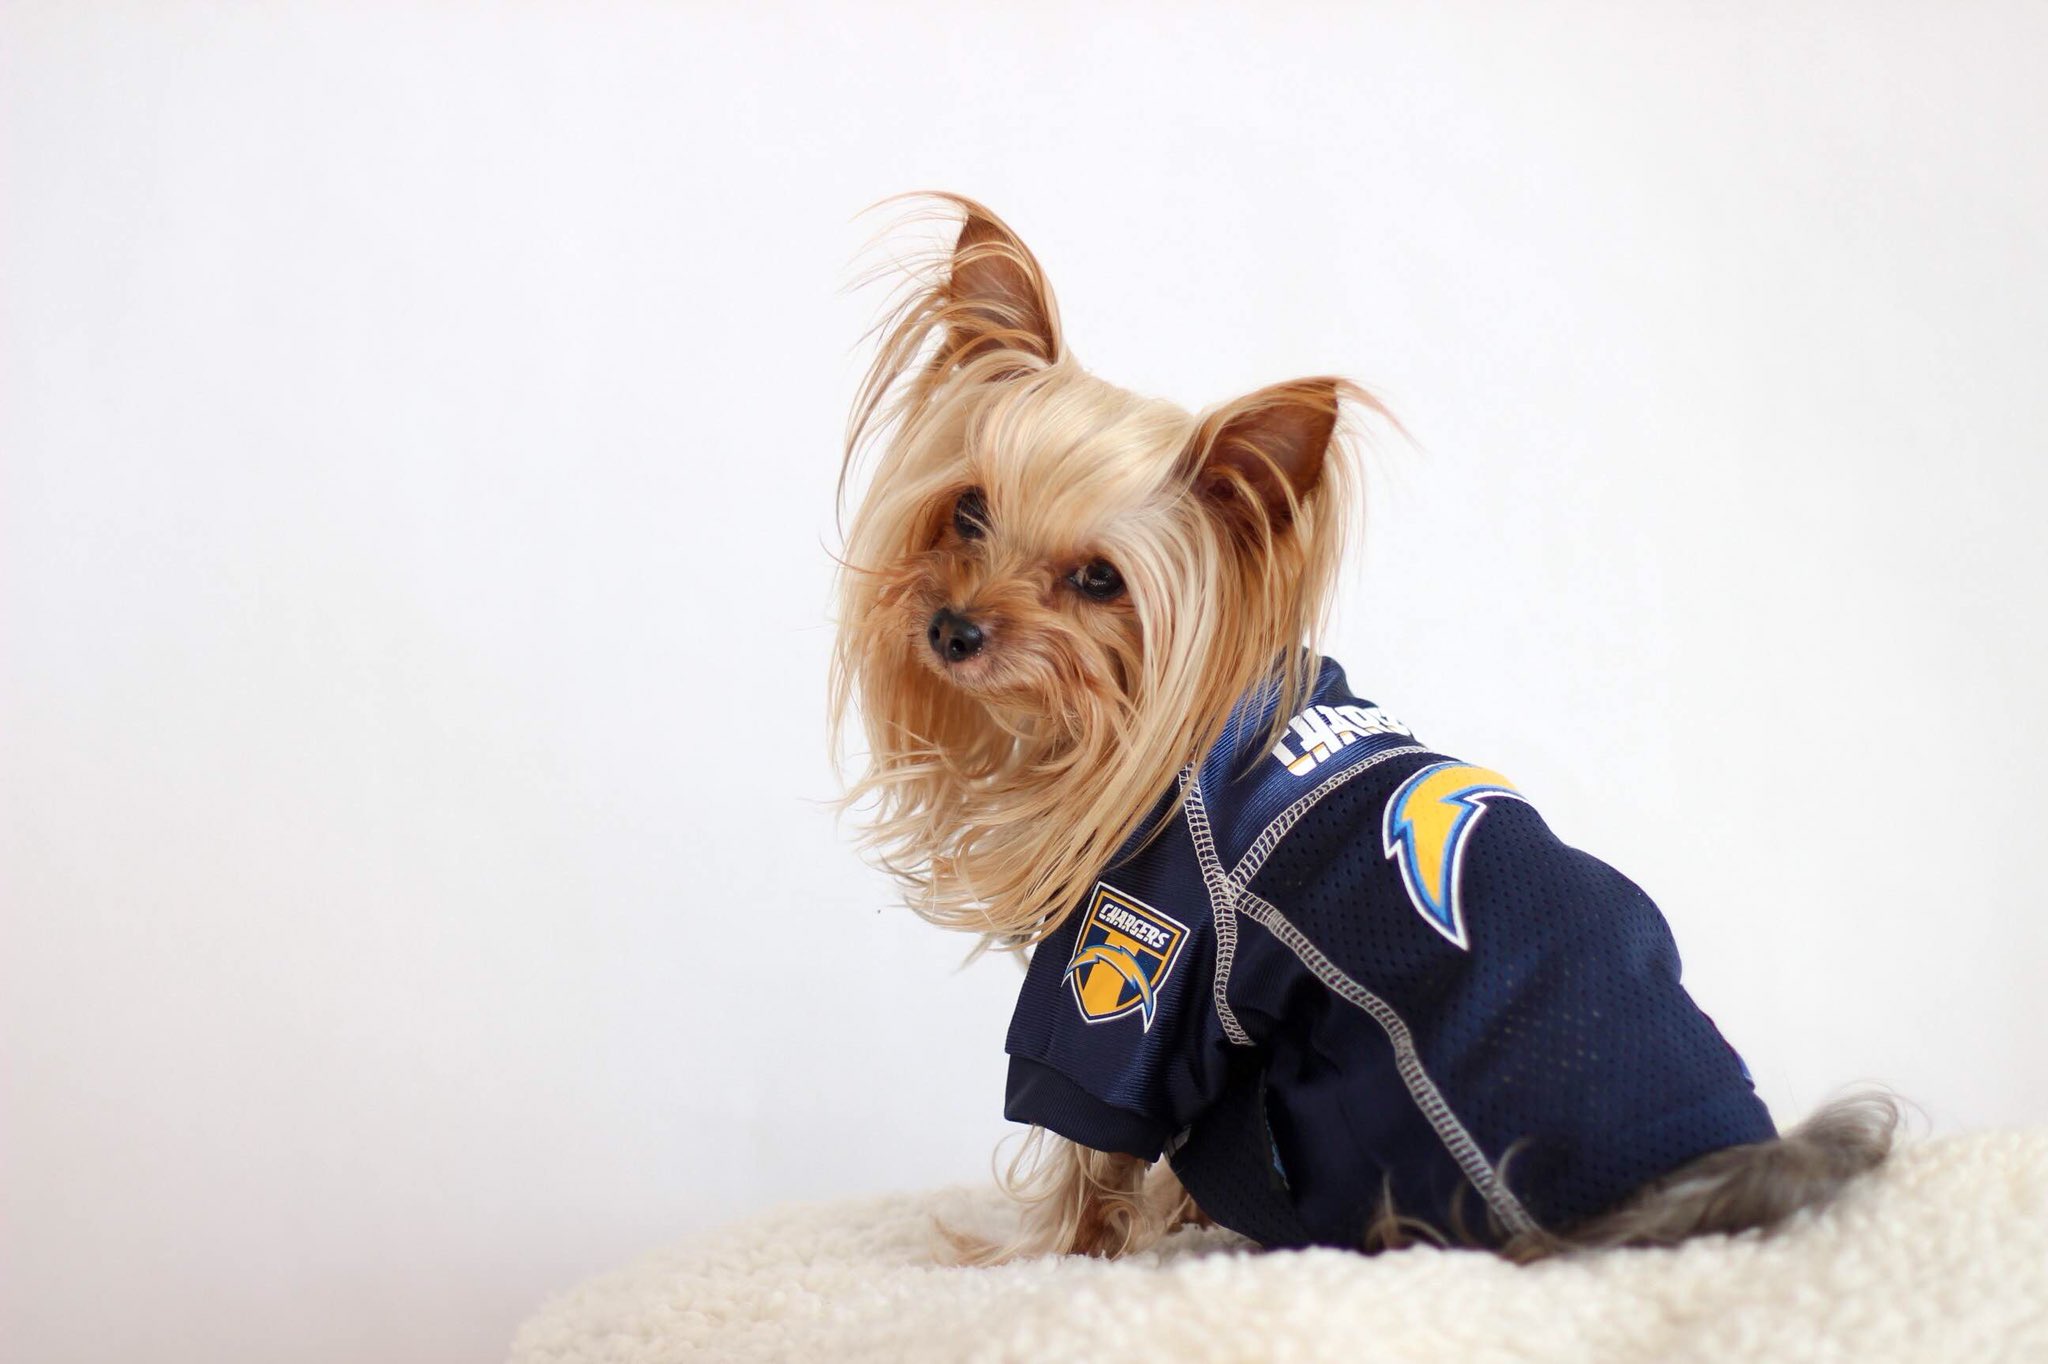 chargers dog jersey